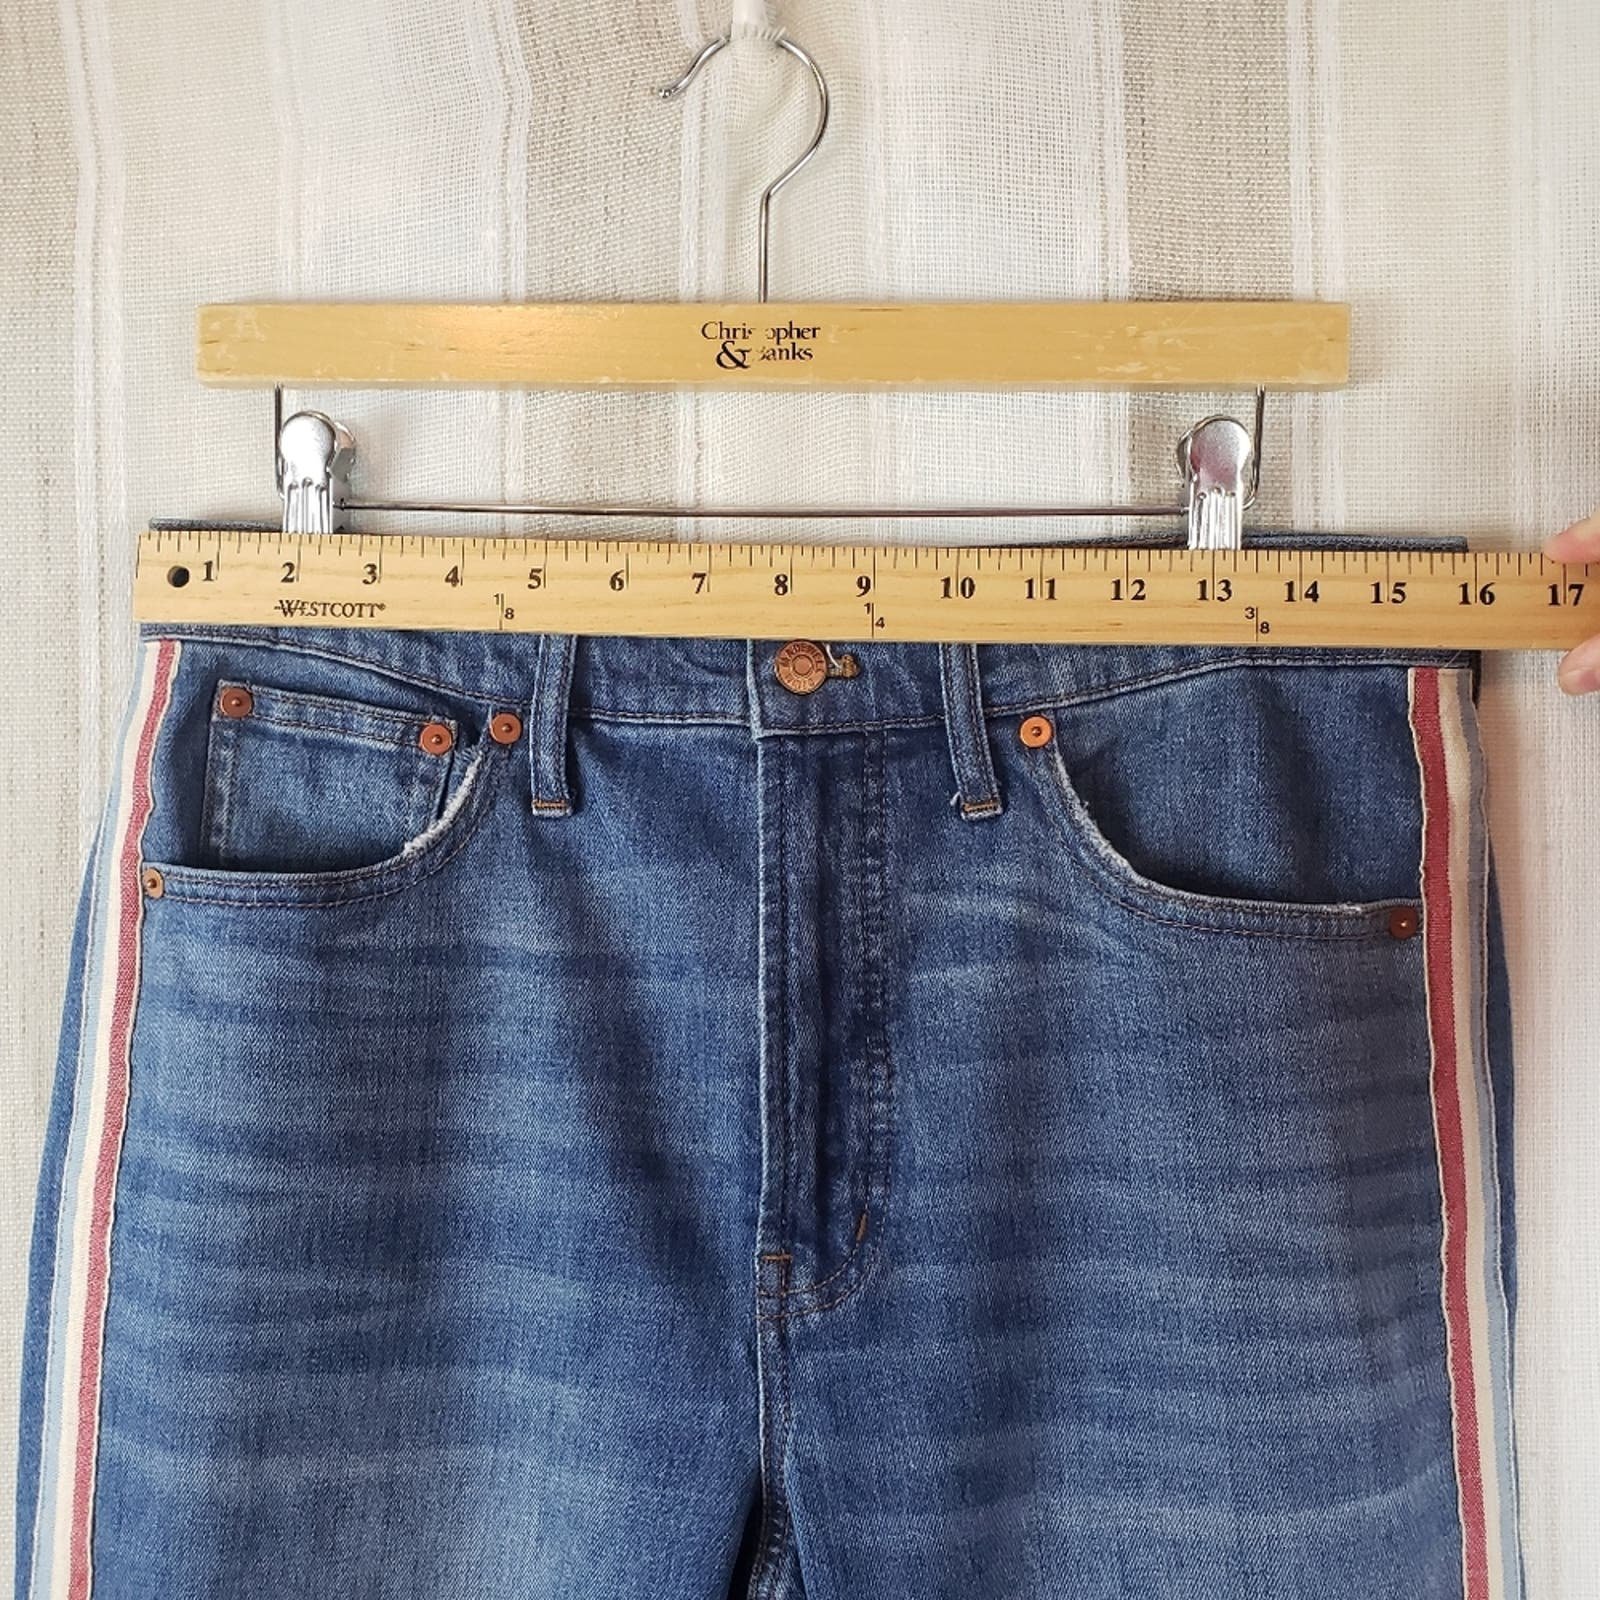 High quality Madewell The Perfect Vintage Crop Jean Tuxedo Stripe Edition Cassie Wash Size 30 OqnfieGBb best sale